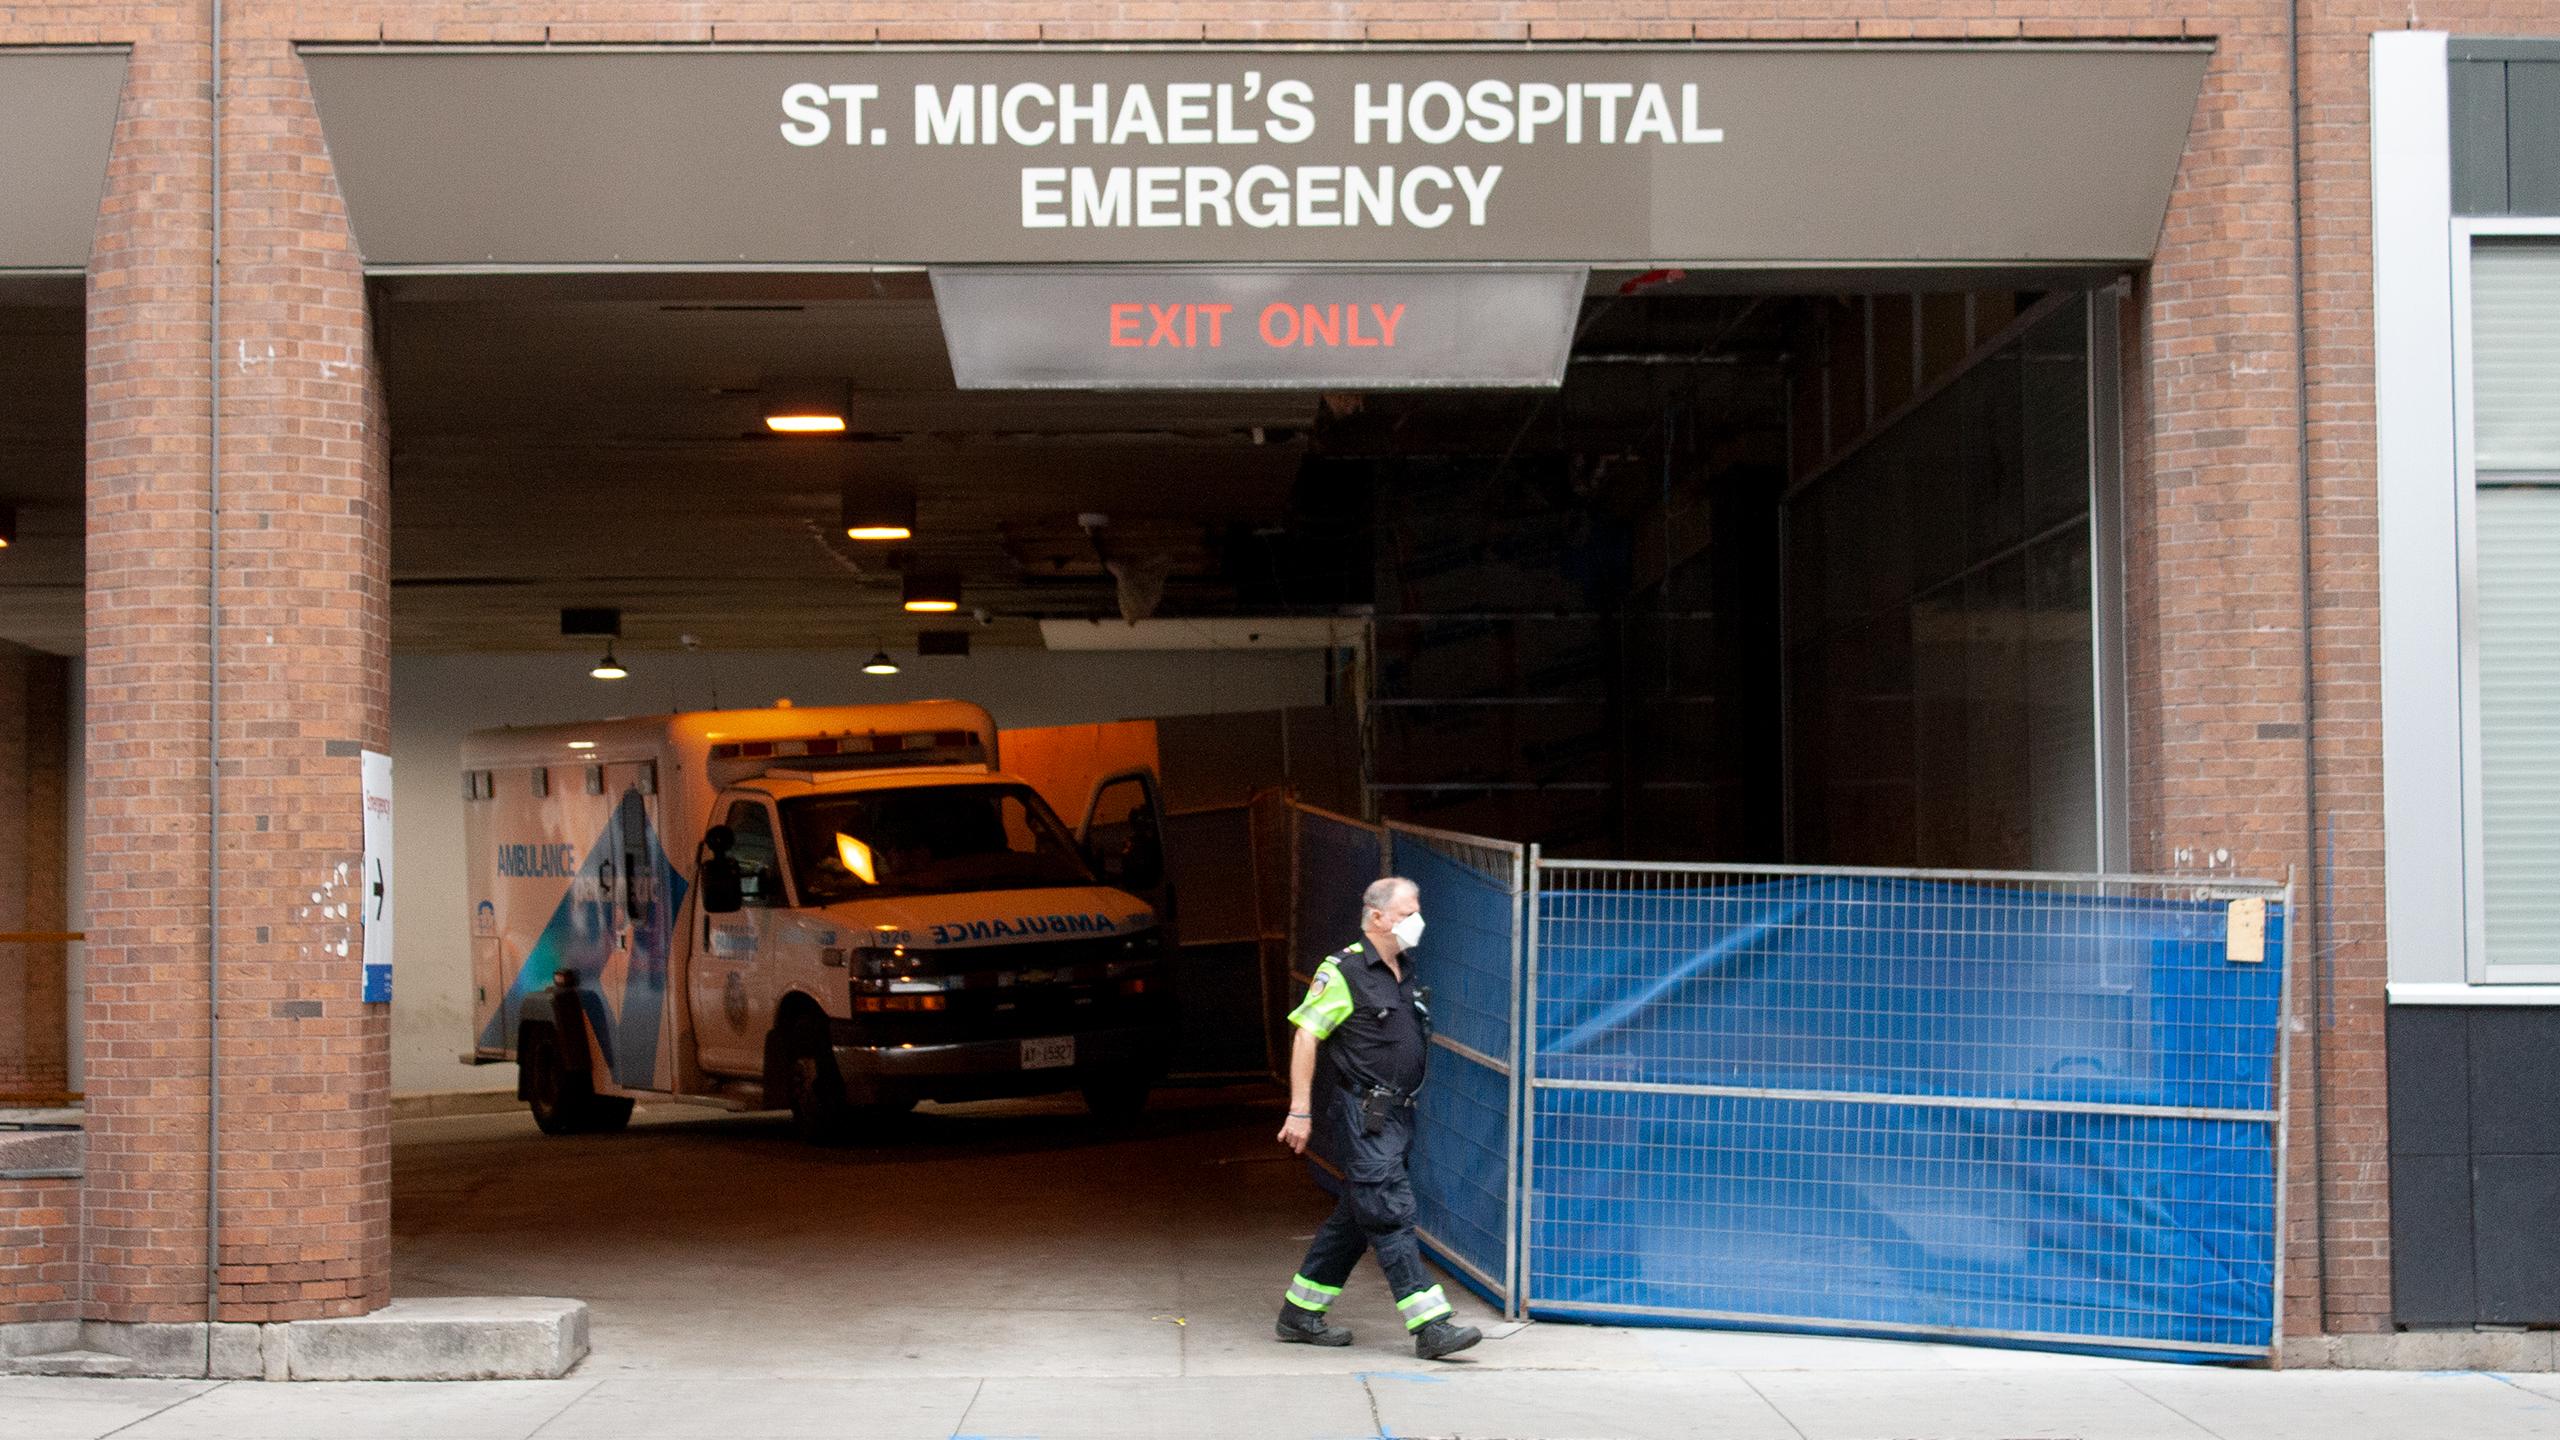 The ambulance entrance for St. Michael's Hospital in Toronto